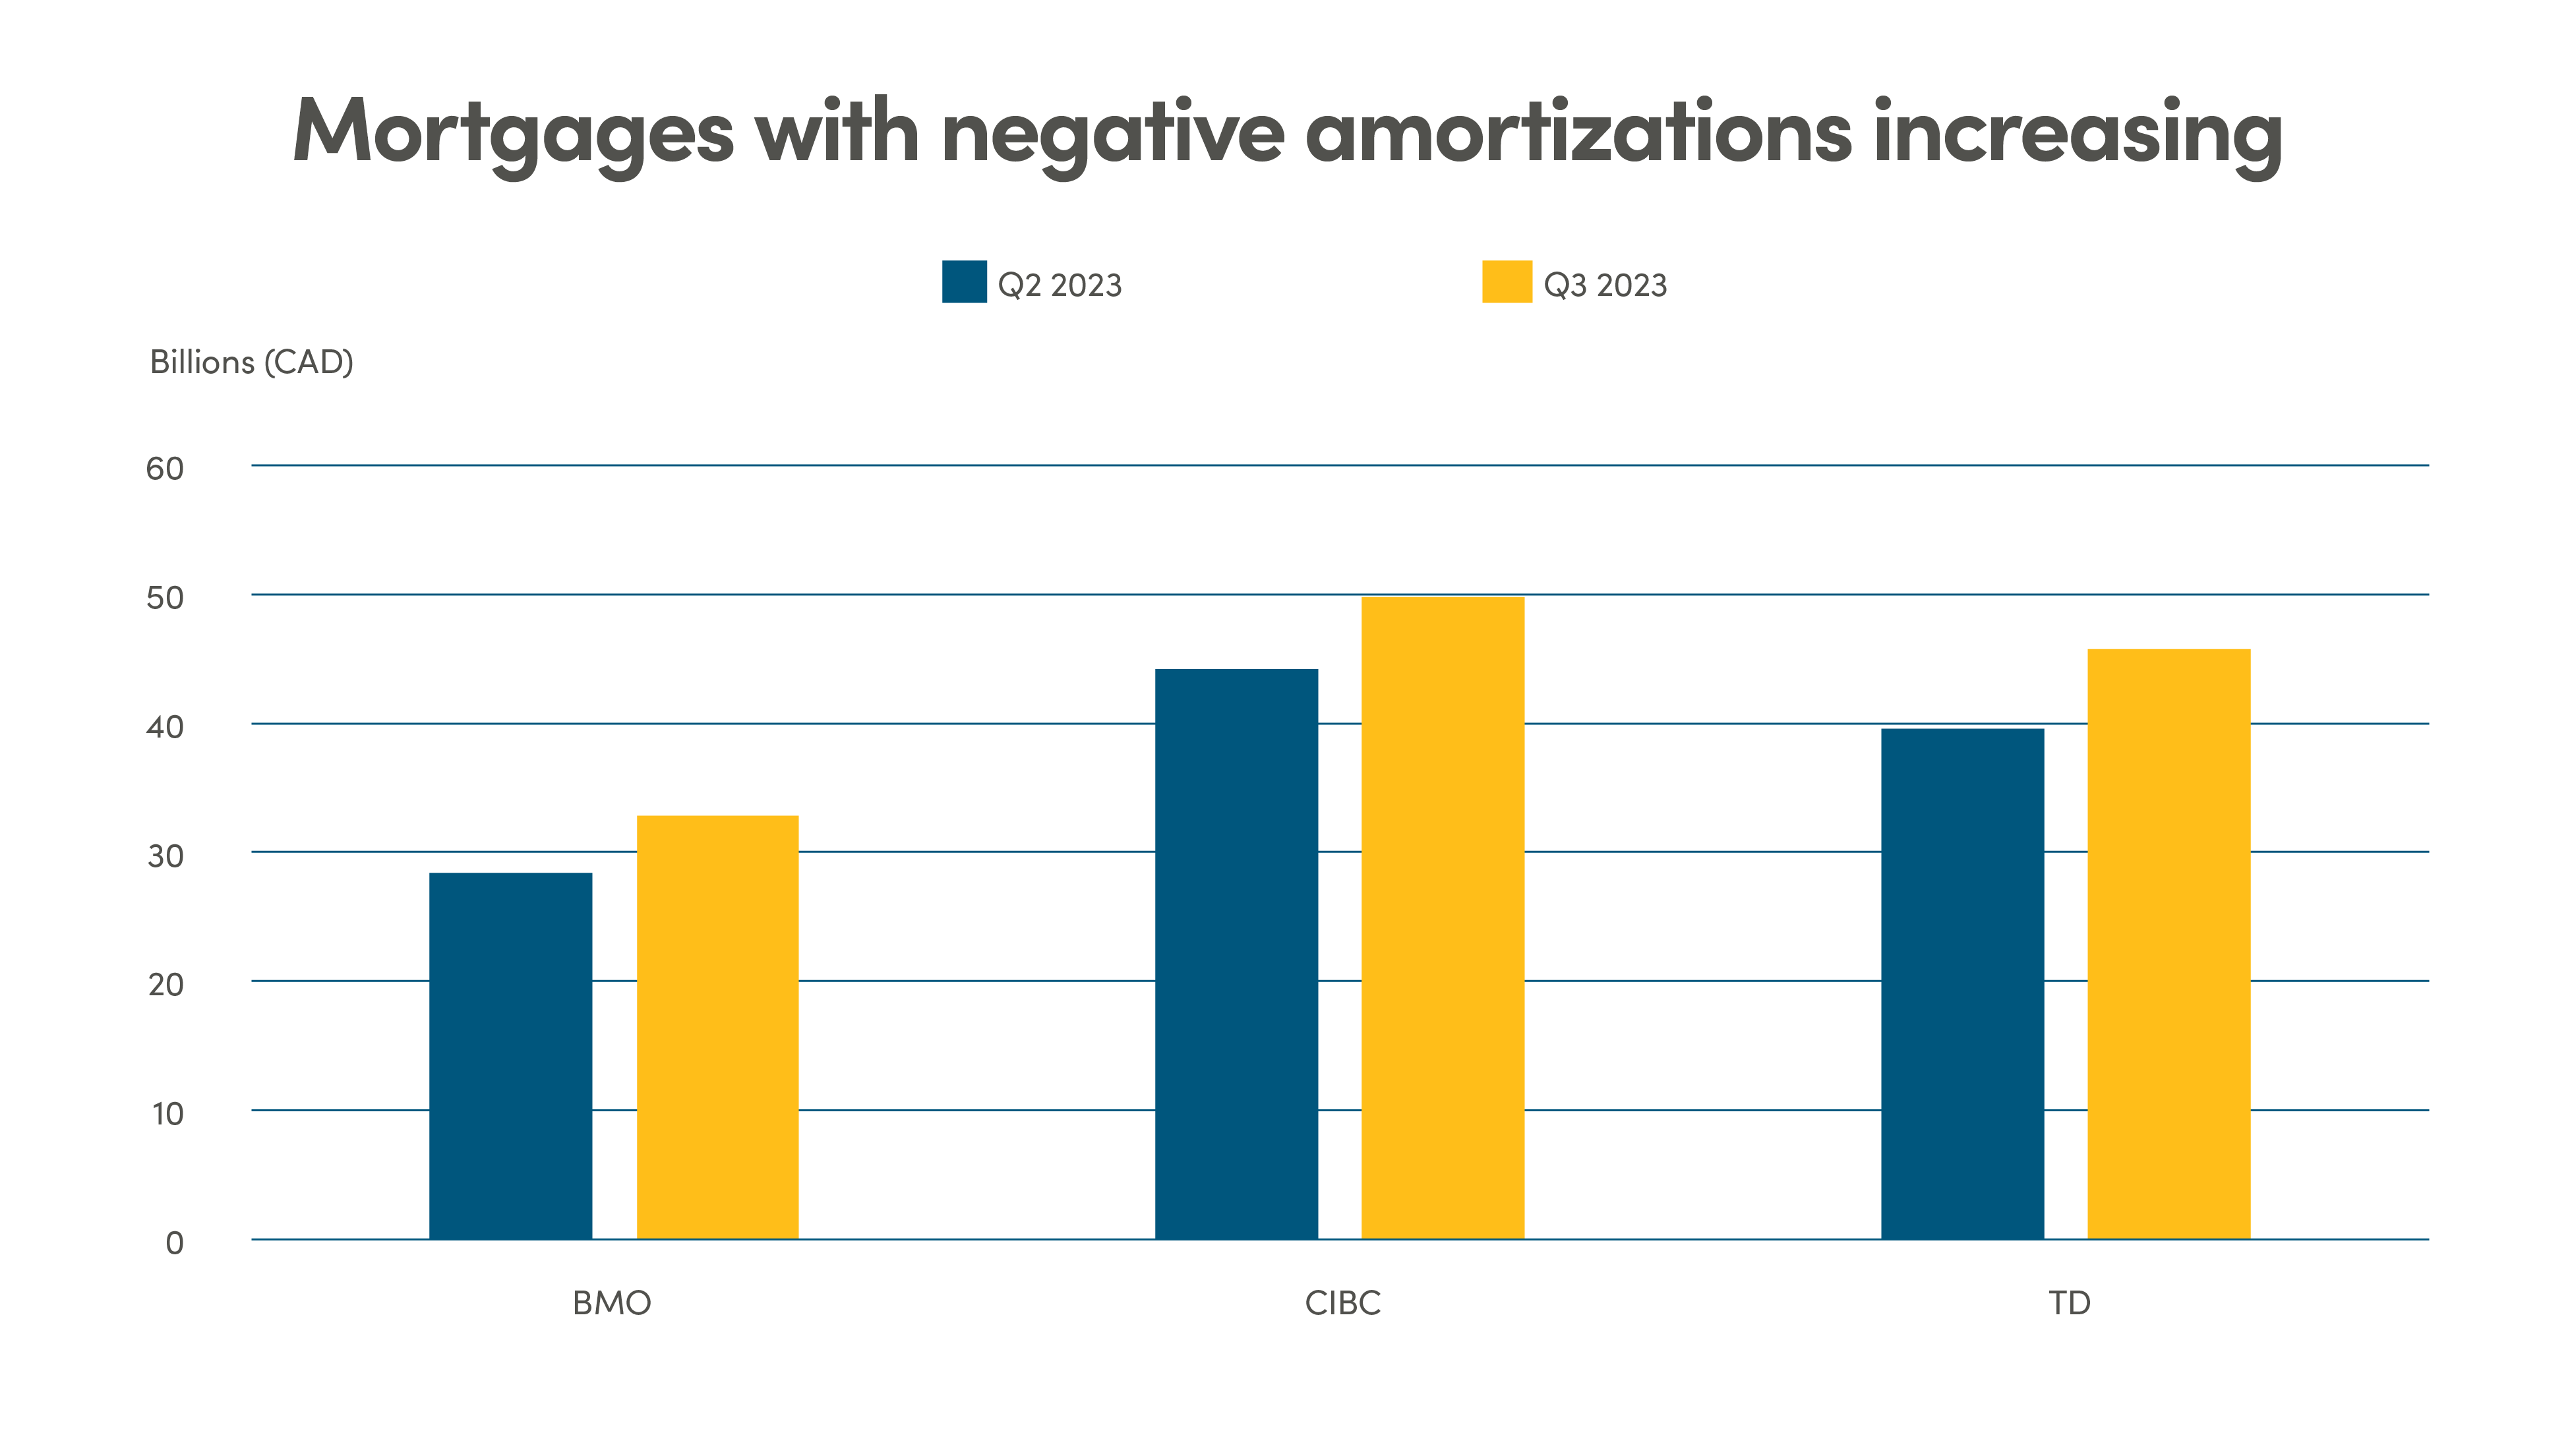 Bar graph comparing mortgages with negative amortizations (in Billions) from Q2 2023 and Q3 2023 at BMO, CIBC and TD. Each bank has a higher amount of mortgages with negative amortizations in Q3 comparied to Q2